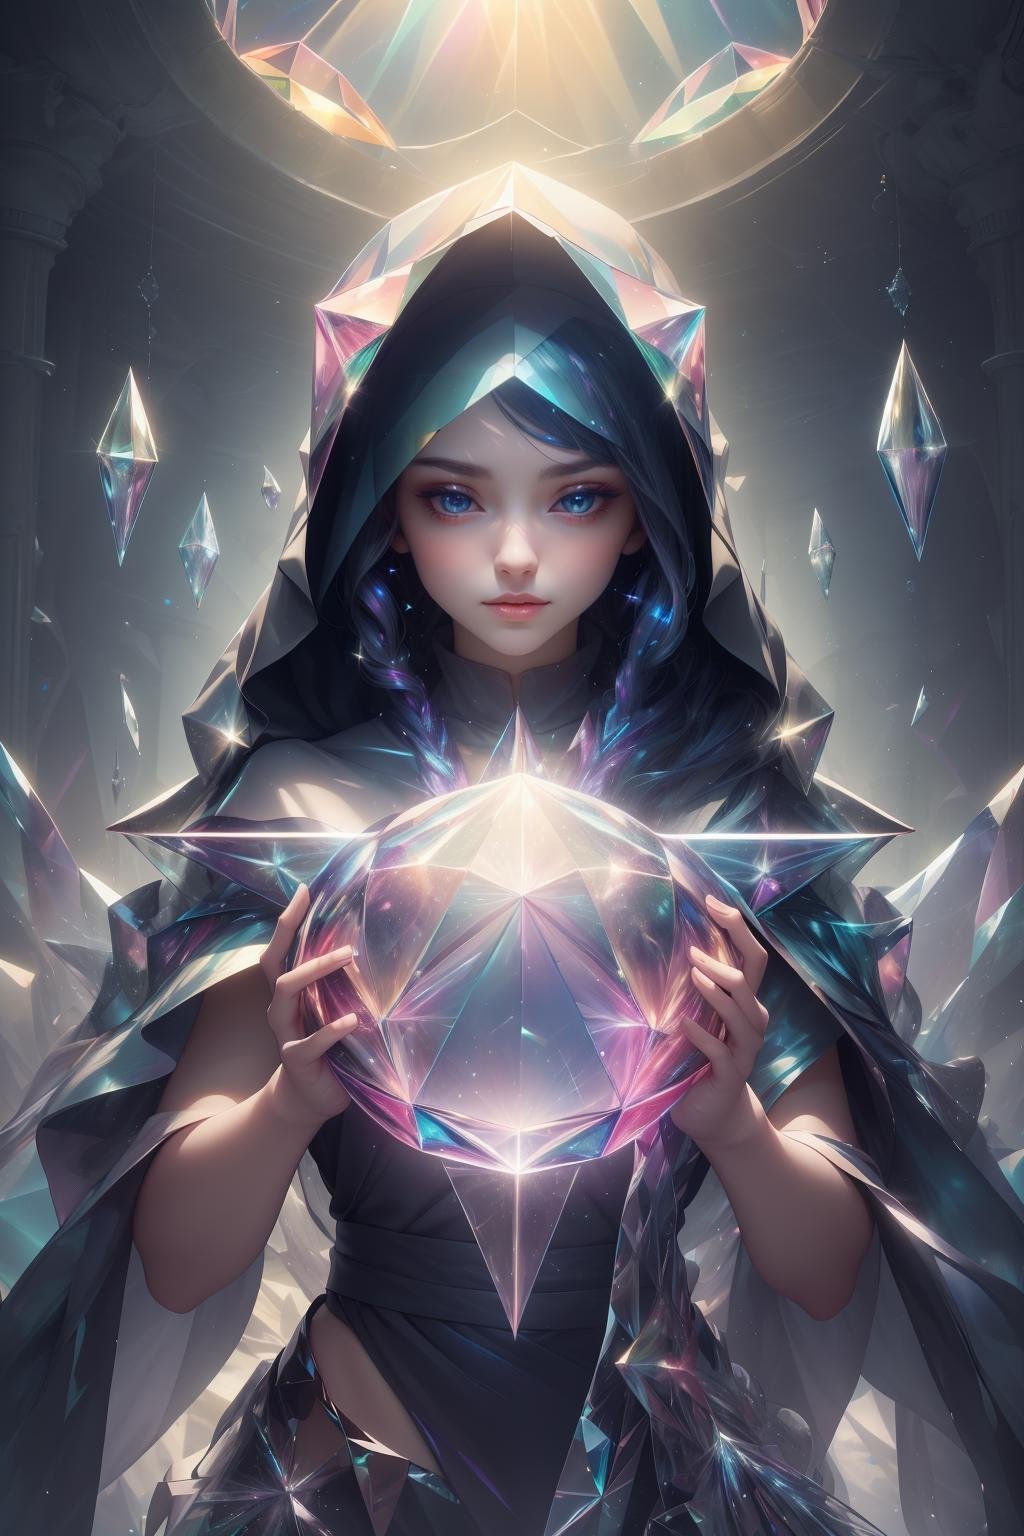 (masterpiece, top quality, best quality, official art, beautiful and aesthetic:1.2),(radial composition:1.2),1 girl,upper body,a nun wearing a transparent hood rebe made of azure crystal,crystalline leggings,magic ball,(crystal church interior),arch,colorful glass,mirror floor reflection,(iridescent,vivid fancy neon color),symmetrical ballance,glowing rainbow color long hair,fantasy,ethereal,epic,(fractal),<lora:samo crystal3-000009:0.7>,<lora:black issey miyake:0.3>,<lora:CrystallineAI:0.4>,